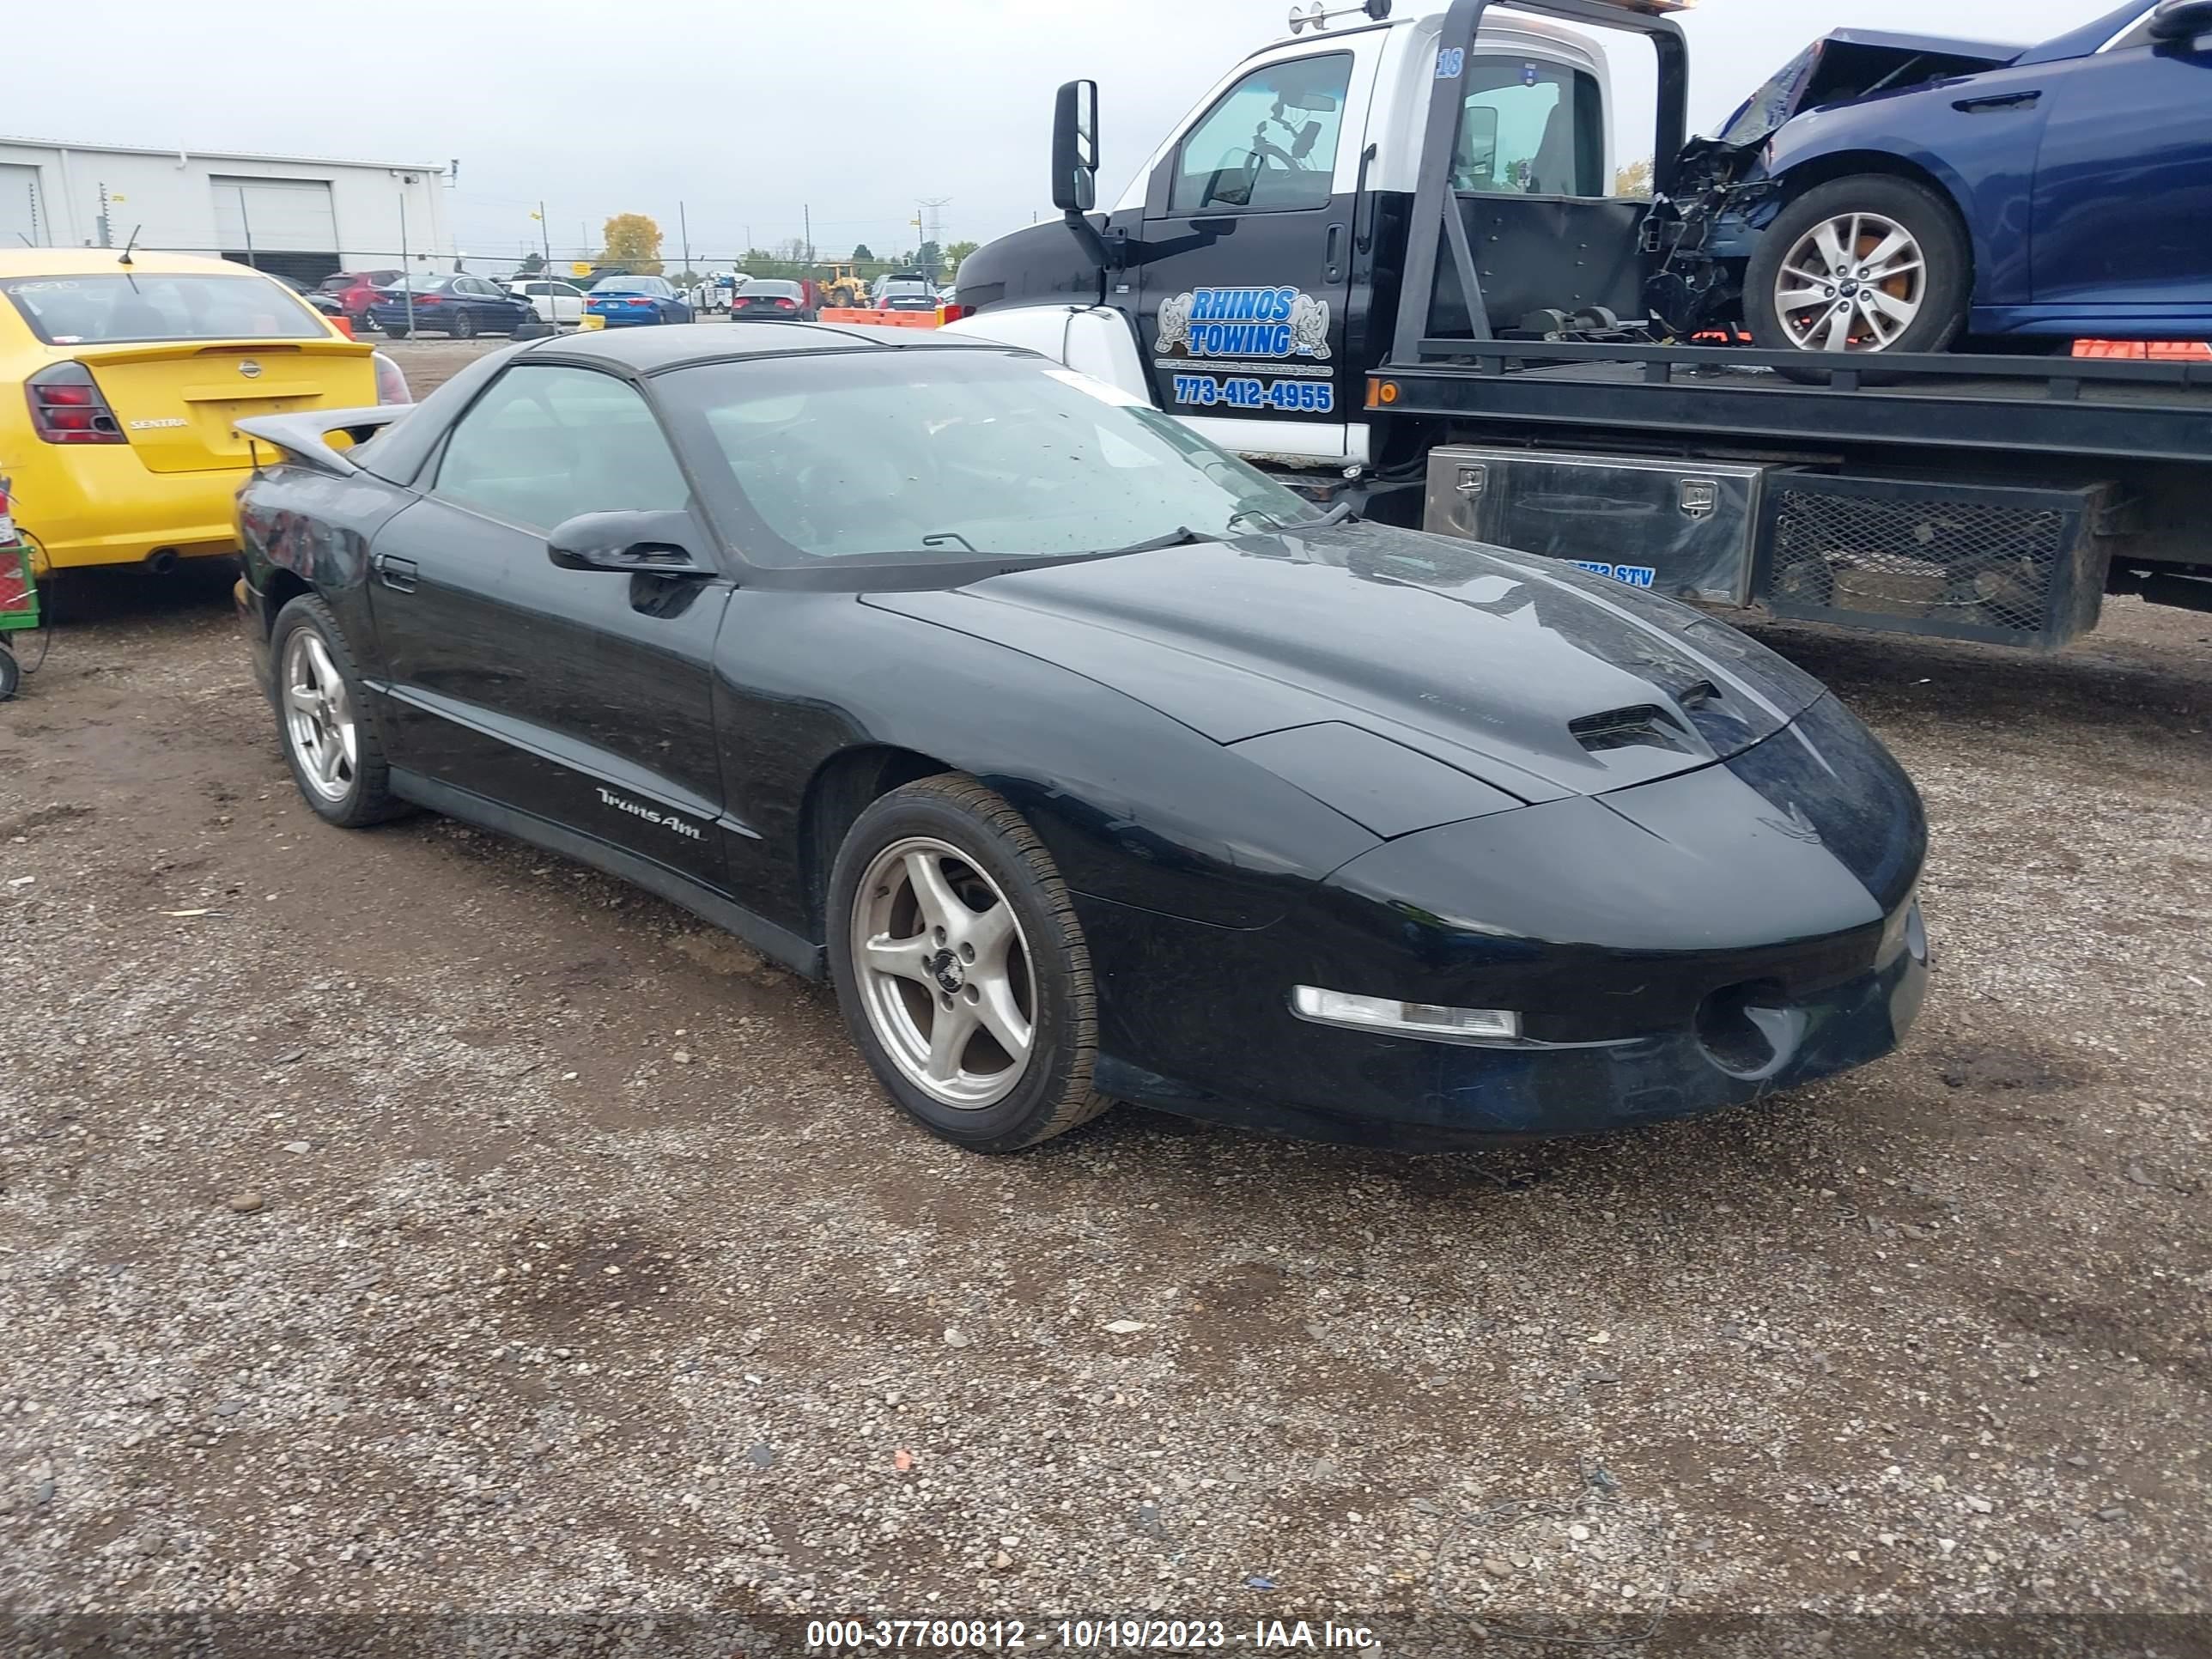 vin: 2G2FV22PXR2202426 2G2FV22PXR2202426 1994 pontiac firebird 5700 for Sale in 60118, 605 Healy Road, East Dundee, Illinois, USA